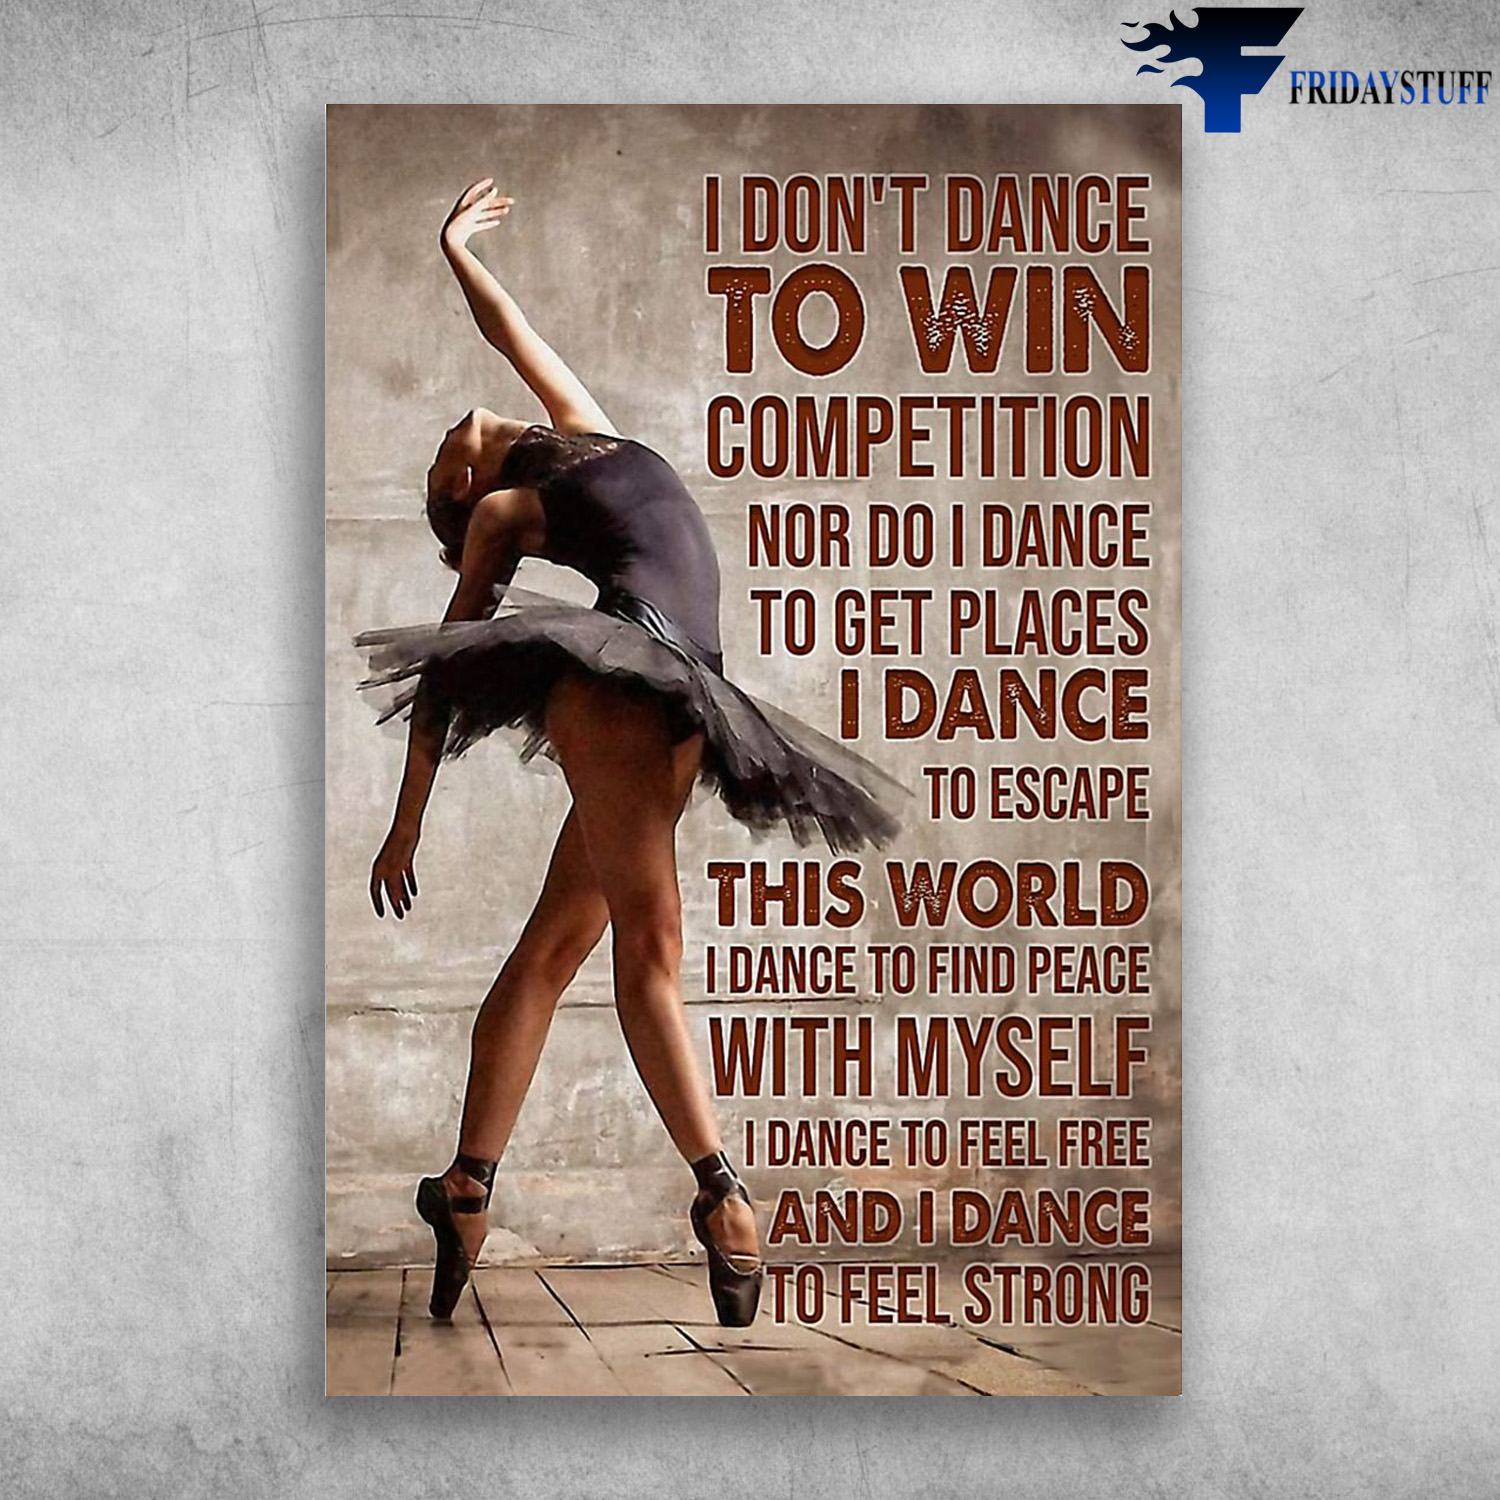 Ballet Dancer Girl - I Don't Dance To Win This Cometition, I Dance To Escape This World